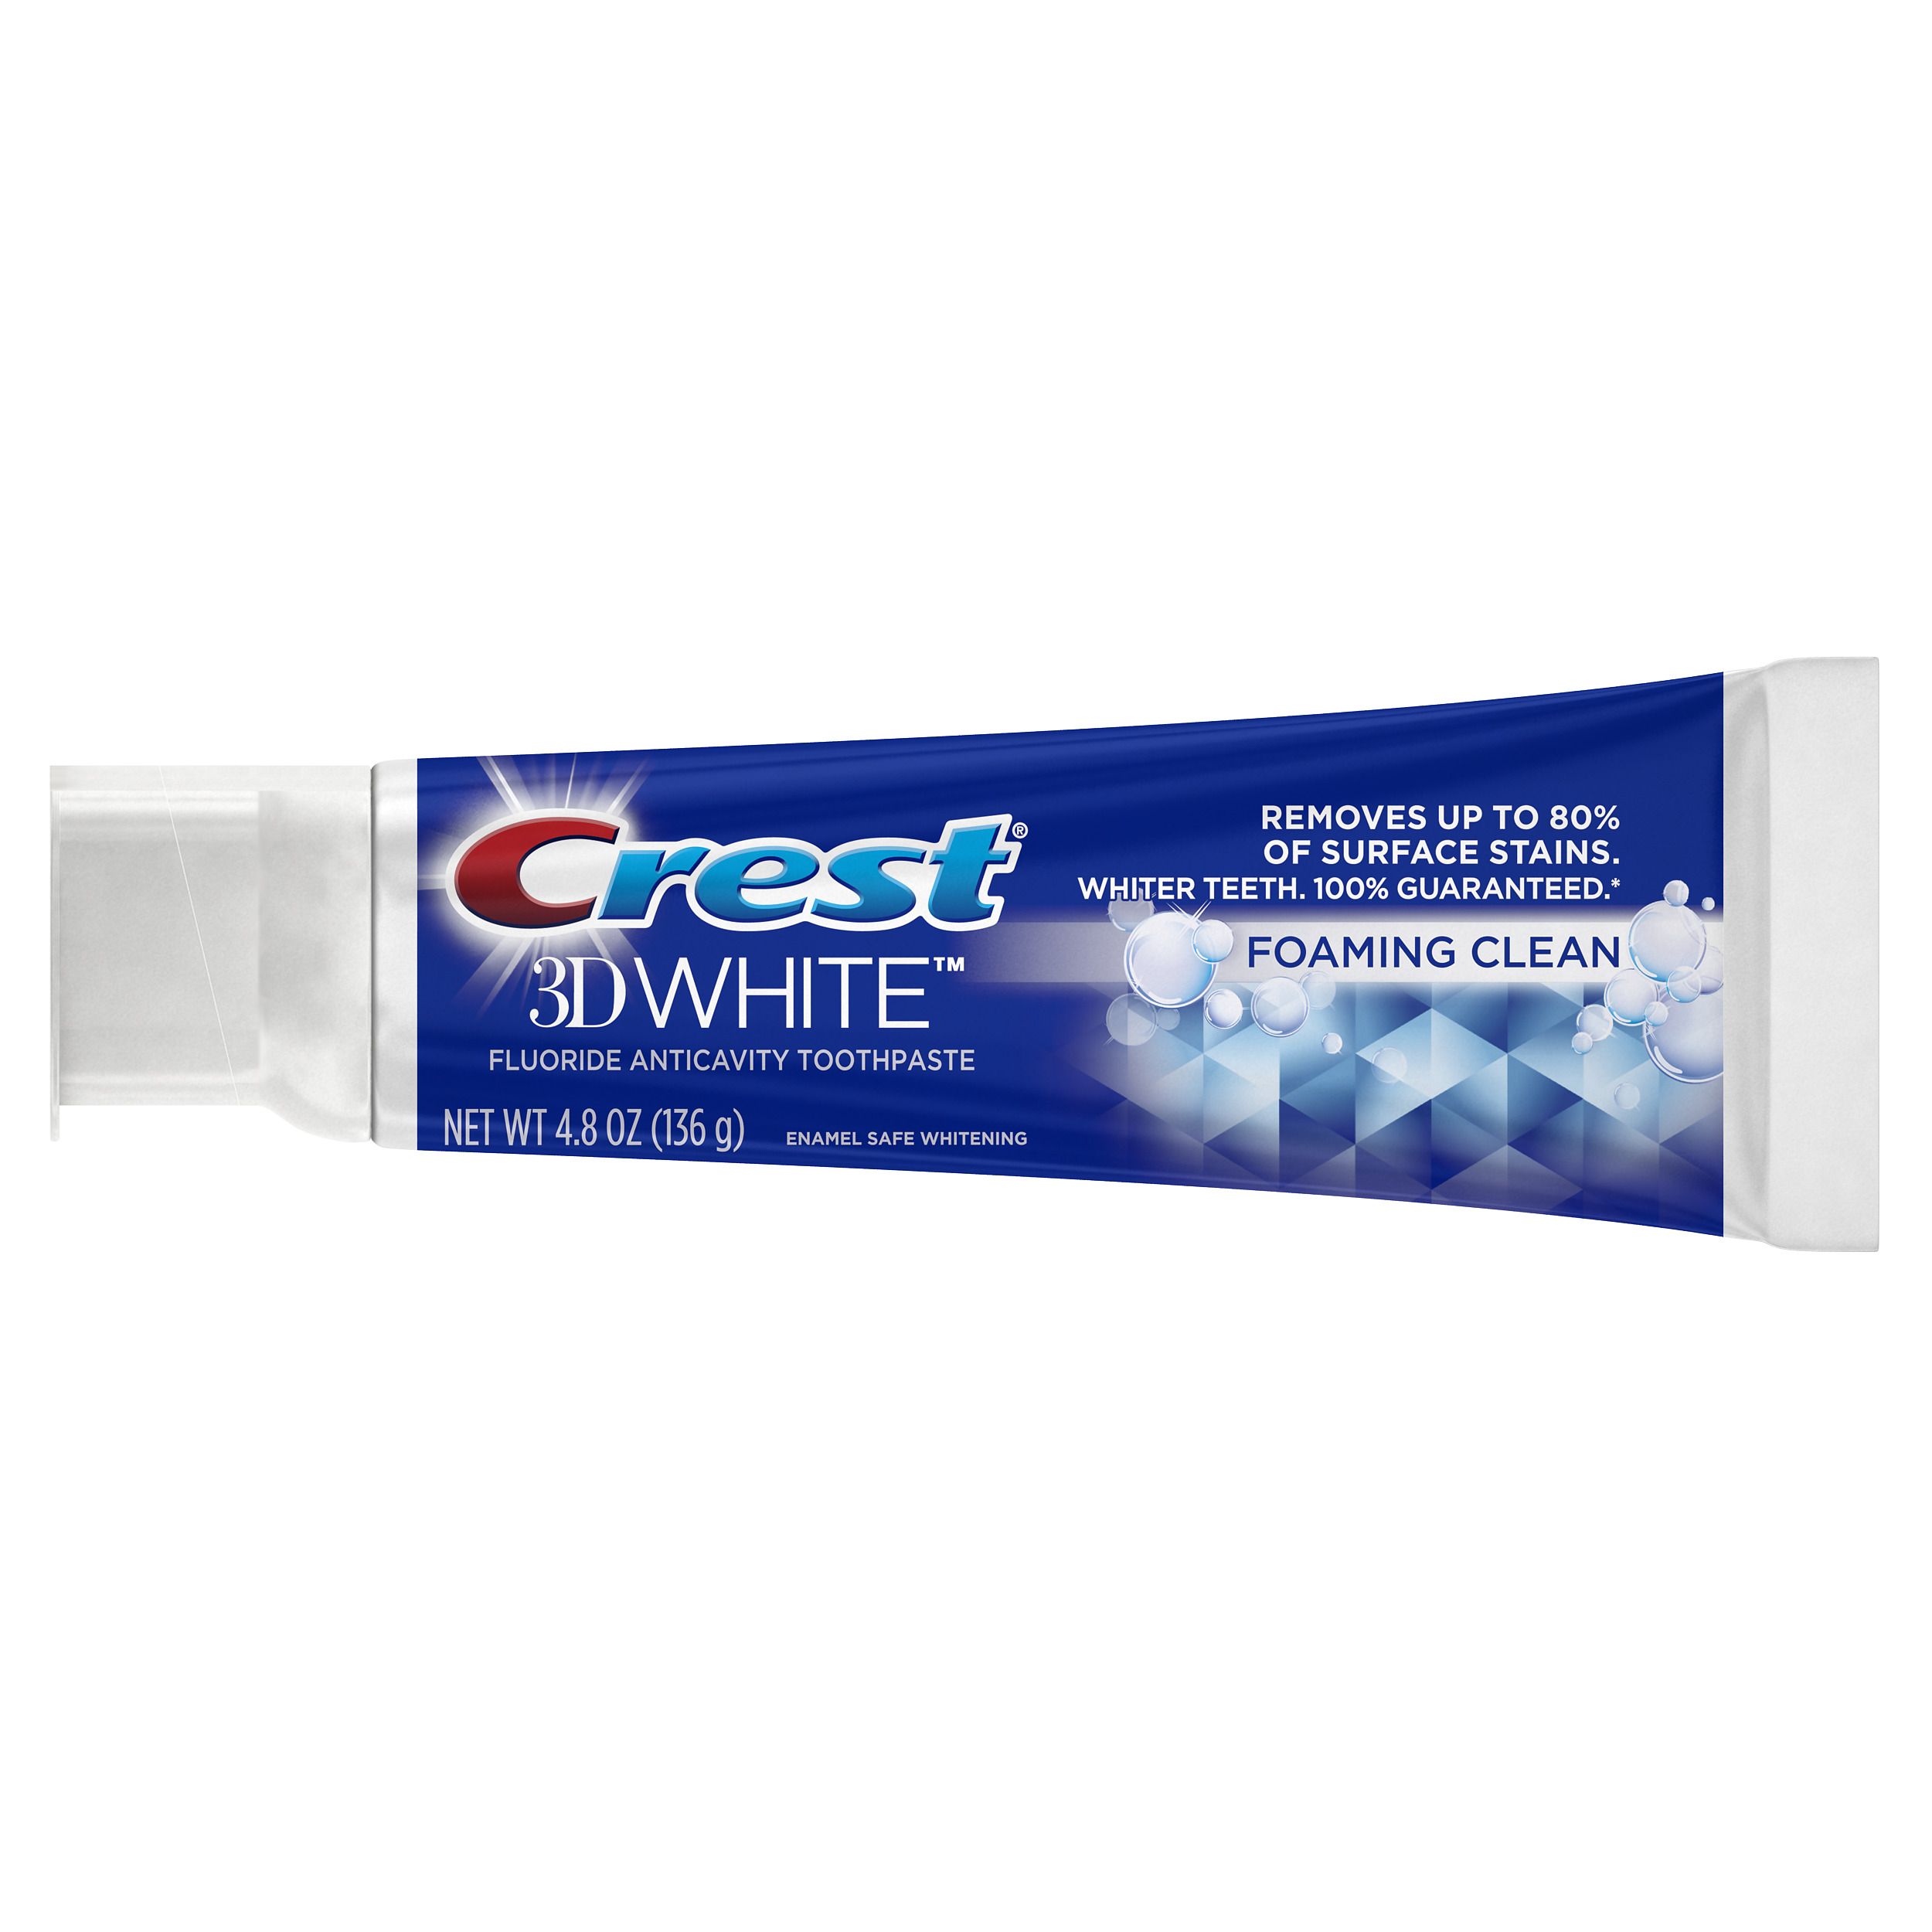 Crest 3D White Foaming Clean Whitening Toothpaste, 4.8 oz, Pack of 2 - image 5 of 9